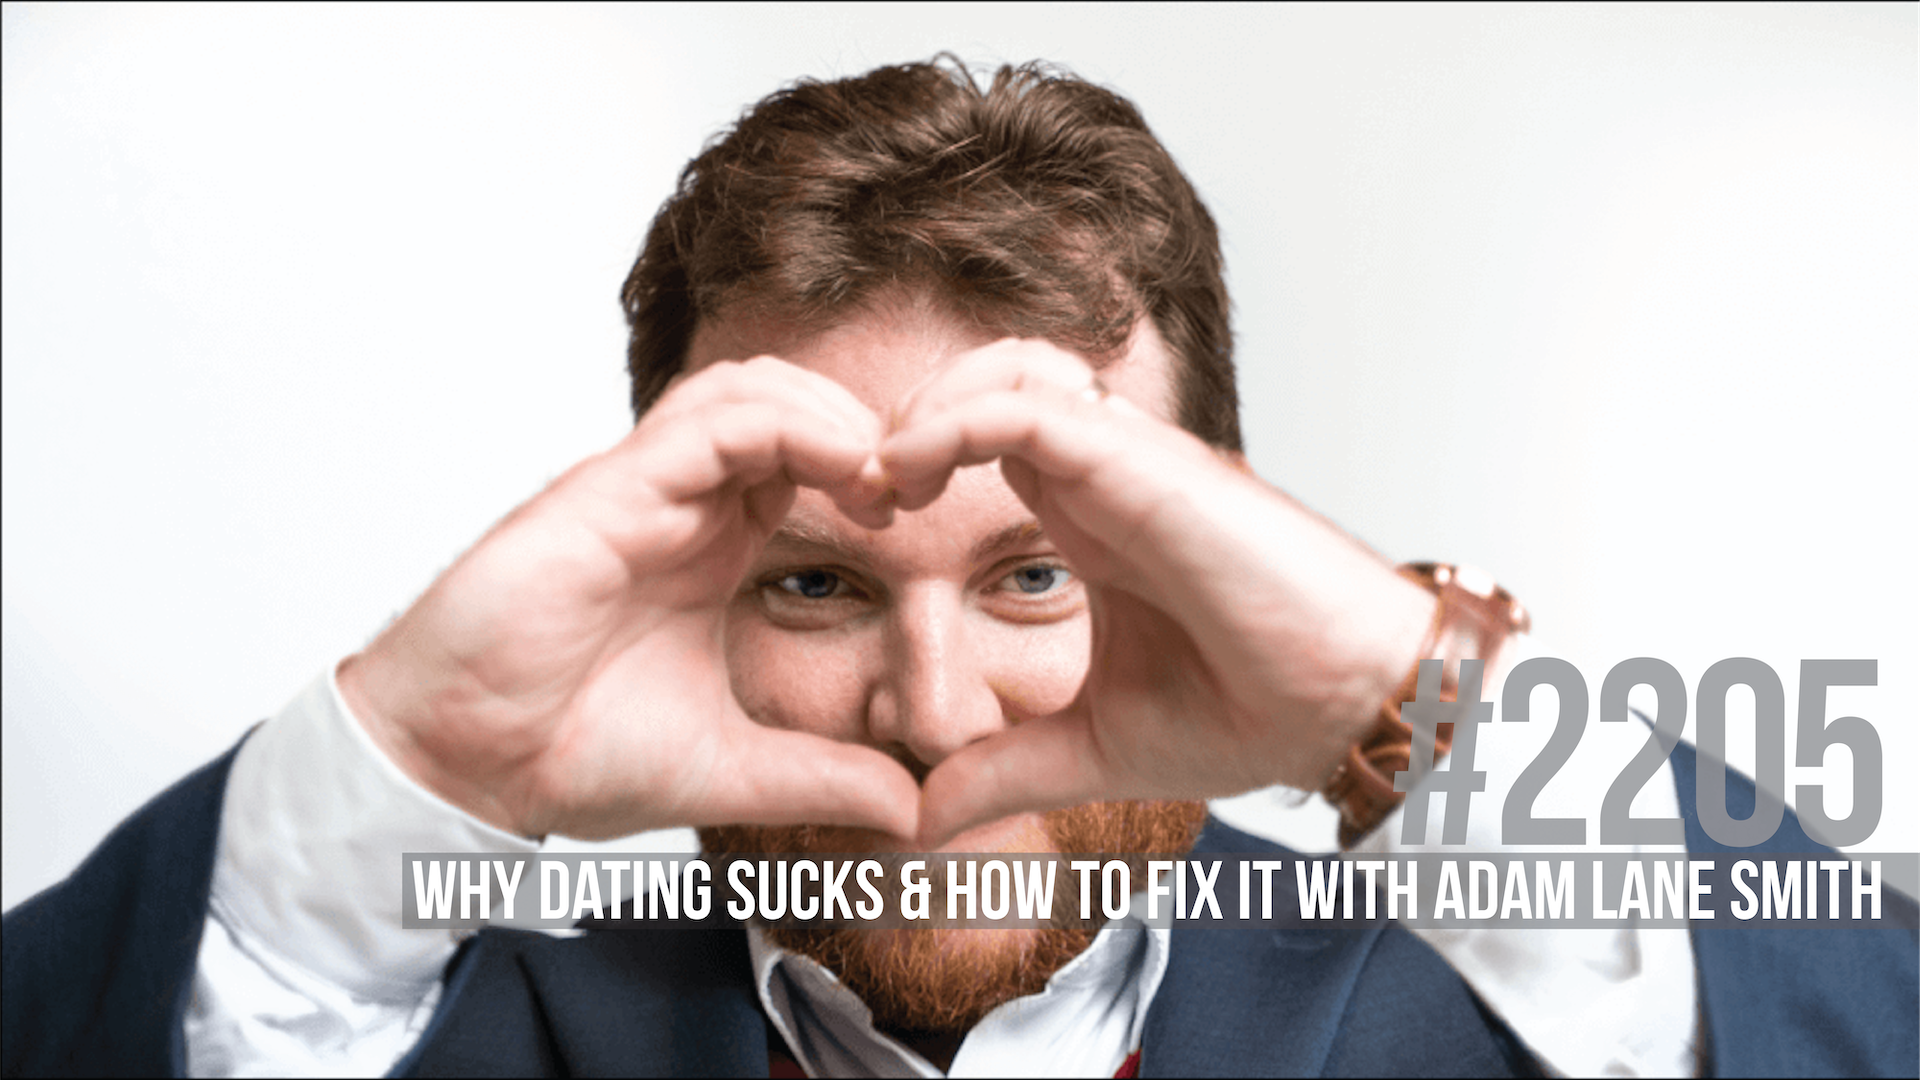 2205: Why Dating Sucks & How to Fix It With Adam Lane Smith